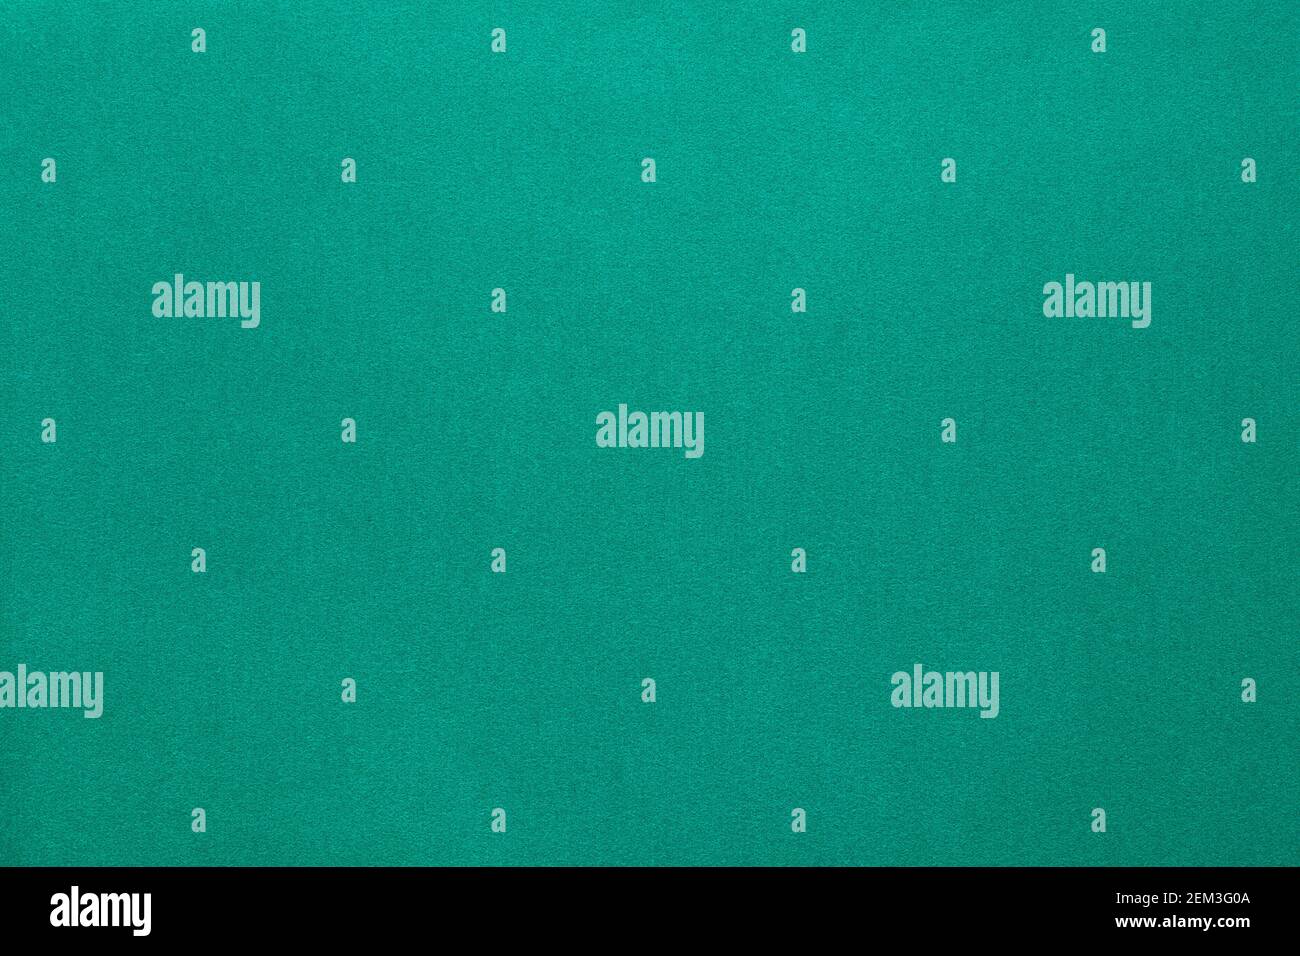 Green poker table cloth texture background Stock Photo